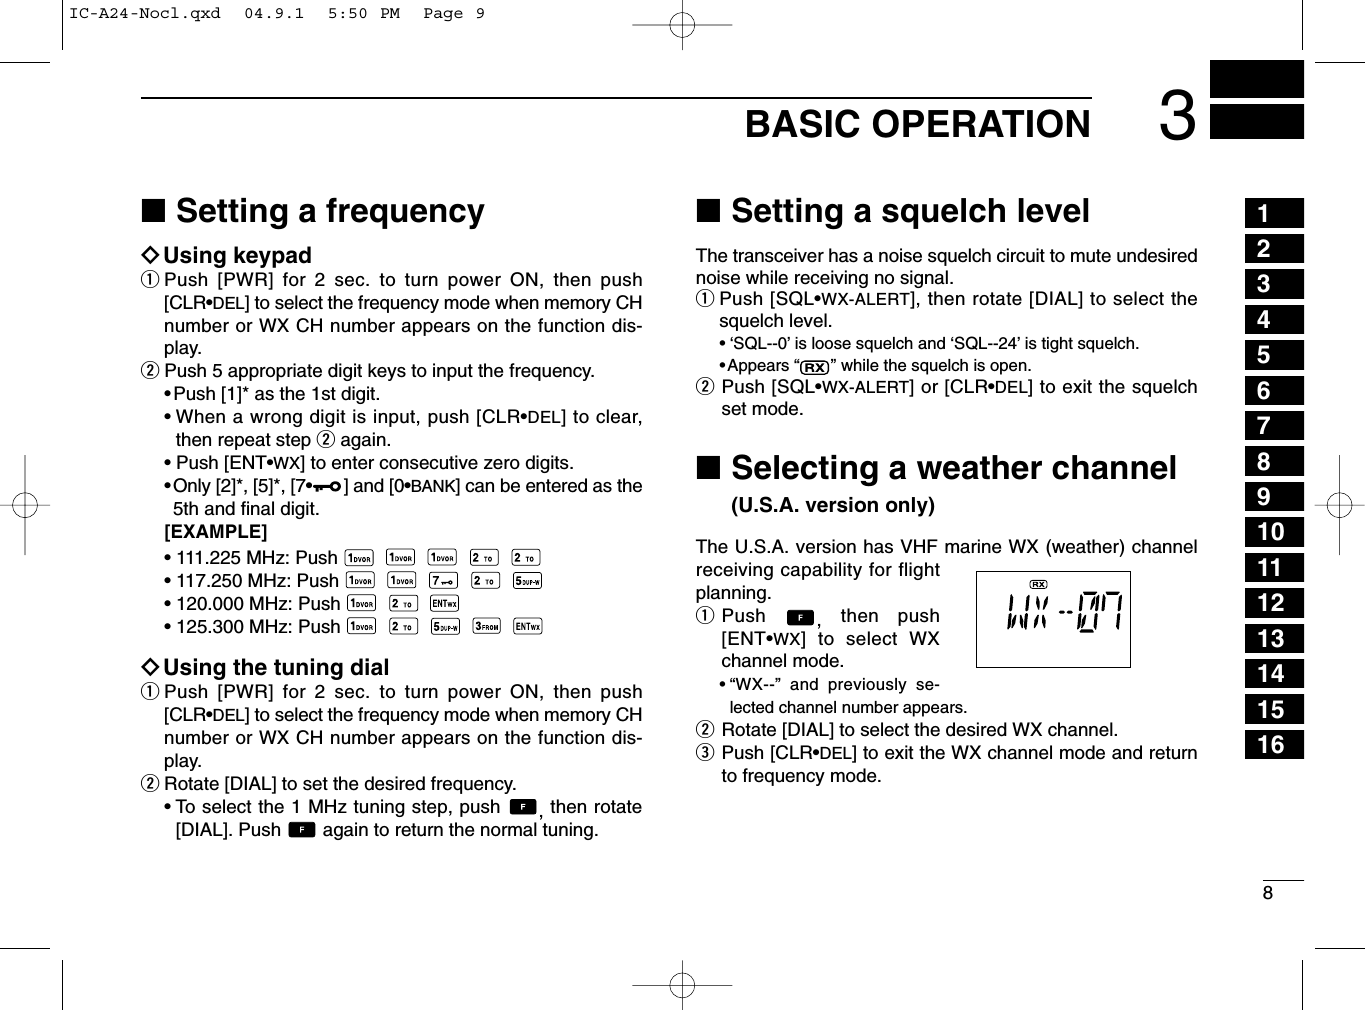 83BASIC OPERATION■Setting a frequencyïUsing keypadqPush [PWR] for 2 sec. to turn power ON, then push[CLR•DEL] to select the frequency mode when memory CHnumber or WX CH number appears on the function dis-play.wPush 5 appropriate digit keys to input the frequency.•Push [1]* as the 1st digit.• When a wrong digit is input, push [CLR•DEL] to clear,then repeat step wagain.•Push [ENT•WX] to enter consecutive zero digits.•Only [2]*, [5]*, [7•] and [0•BANK] can be entered as the5th and ﬁnal digit.[EXAMPLE]• 111.225 MHz: Push• 117.250 MHz: Push• 120.000 MHz: Push• 125.300 MHz: PushïUsing the tuning dialqPush [PWR] for 2 sec. to turn power ON, then push[CLR•DEL] to select the frequency mode when memory CHnumber or WX CH number appears on the function dis-play.wRotate [DIAL] to set the desired frequency.• To select the 1 MHz tuning step, push  , then rotate[DIAL]. Push  again to return the normal tuning.■Setting a squelch levelThe transceiver has a noise squelch circuit to mute undesirednoise while receiving no signal.qPush [SQL•WX-ALERT], then rotate [DIAL] to select thesquelch level.• ‘SQL--0’is loose squelch and ‘SQL--24’is tight squelch.•Appears “” while the squelch is open.wPush [SQL•WX-ALERT] or [CLR•DEL] to exit the squelchset mode.■Selecting a weather channel (U.S.A. version only)The U.S.A. version has VHF marine WX (weather) channelreceiving capability for flightplanning.qPush  ,then push[ENT•WX] to select WXchannel mode.•“WX--” and previously se-lected channel number appears.wRotate [DIAL] to select the desired WX channel.ePush [CLR•DEL] to exit the WX channel mode and returnto frequency mode.12345678910111213141516IC-A24-Nocl.qxd  04.9.1  5:50 PM  Page 9